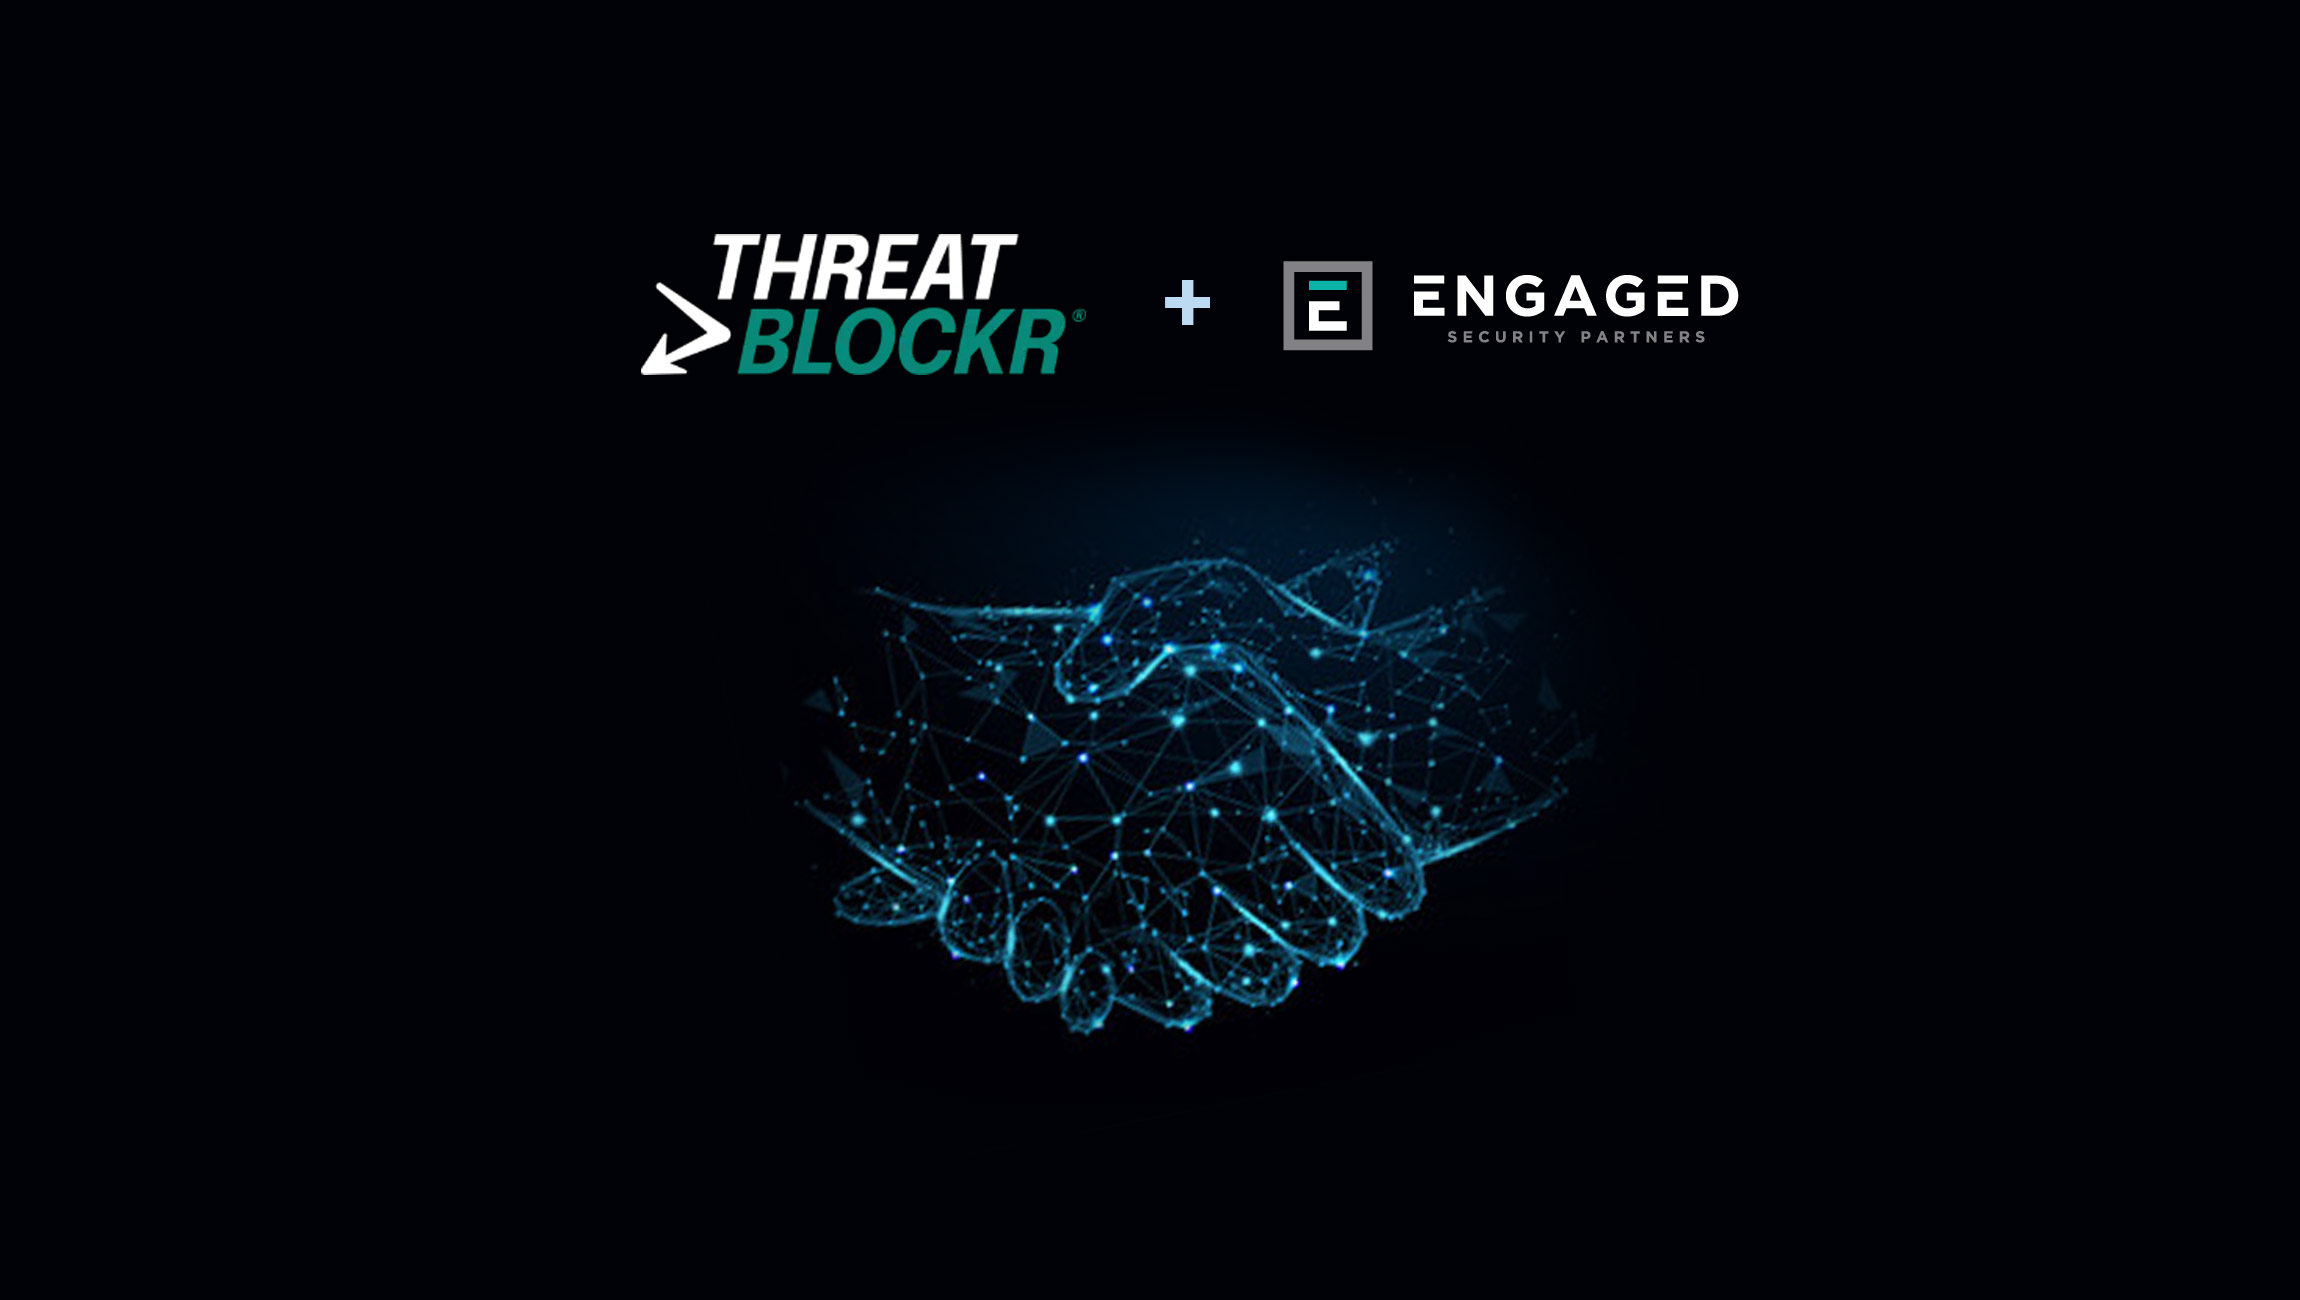 ThreatBlockr Announces Partnership with Engaged Security Partners